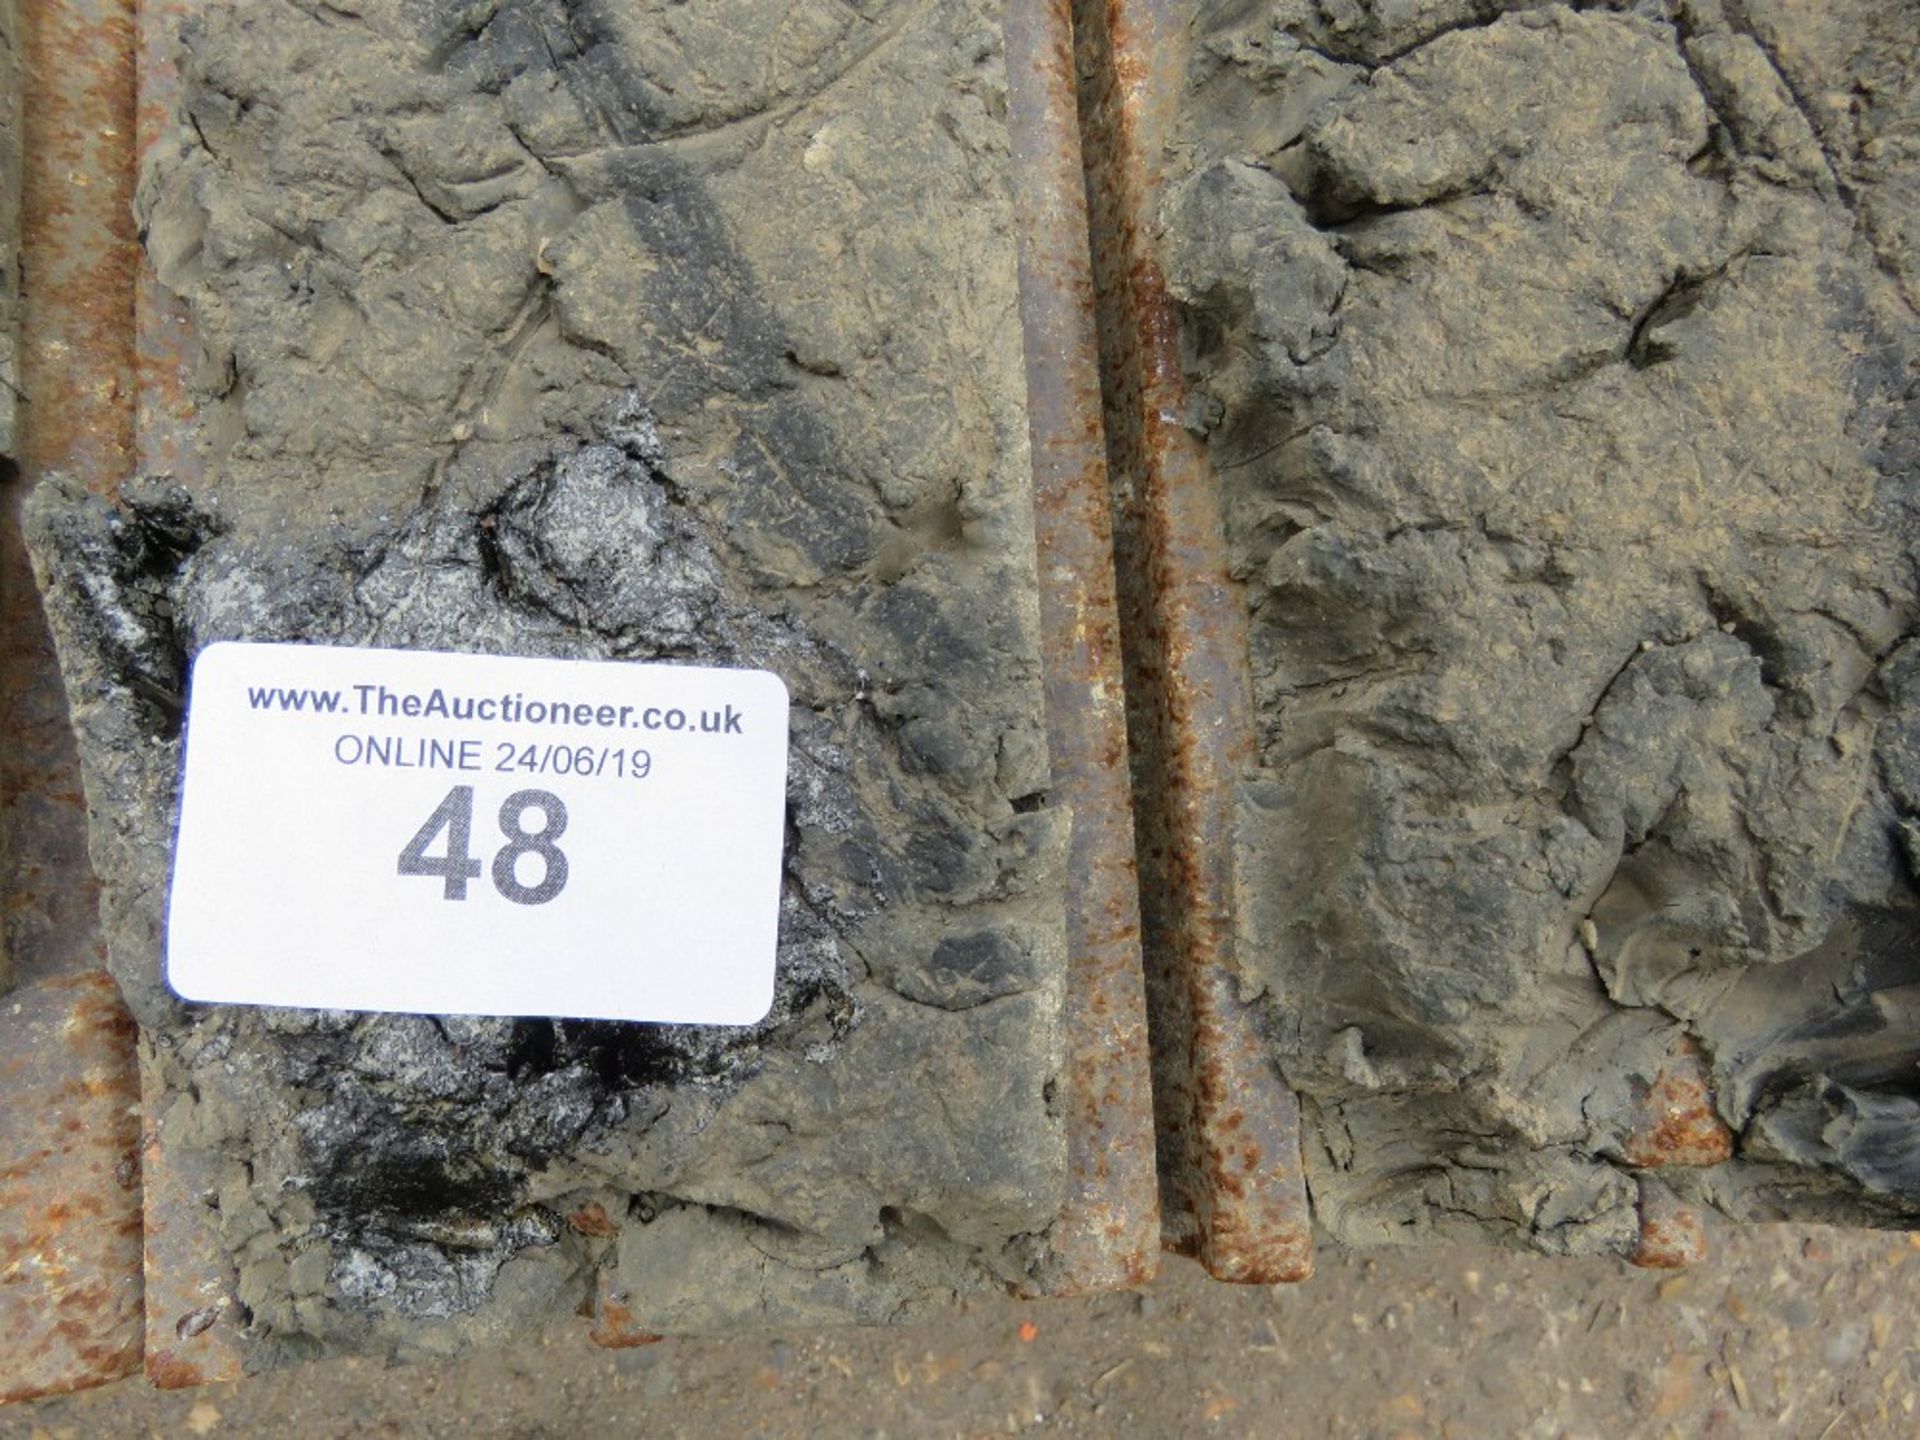 PAIR OF HITACHI 6 TONNE EXCAVATOR STEEL TRACKS C/W BLOCK PADS...REMOVED TO REPLACE WITH RUBBER - Image 3 of 3